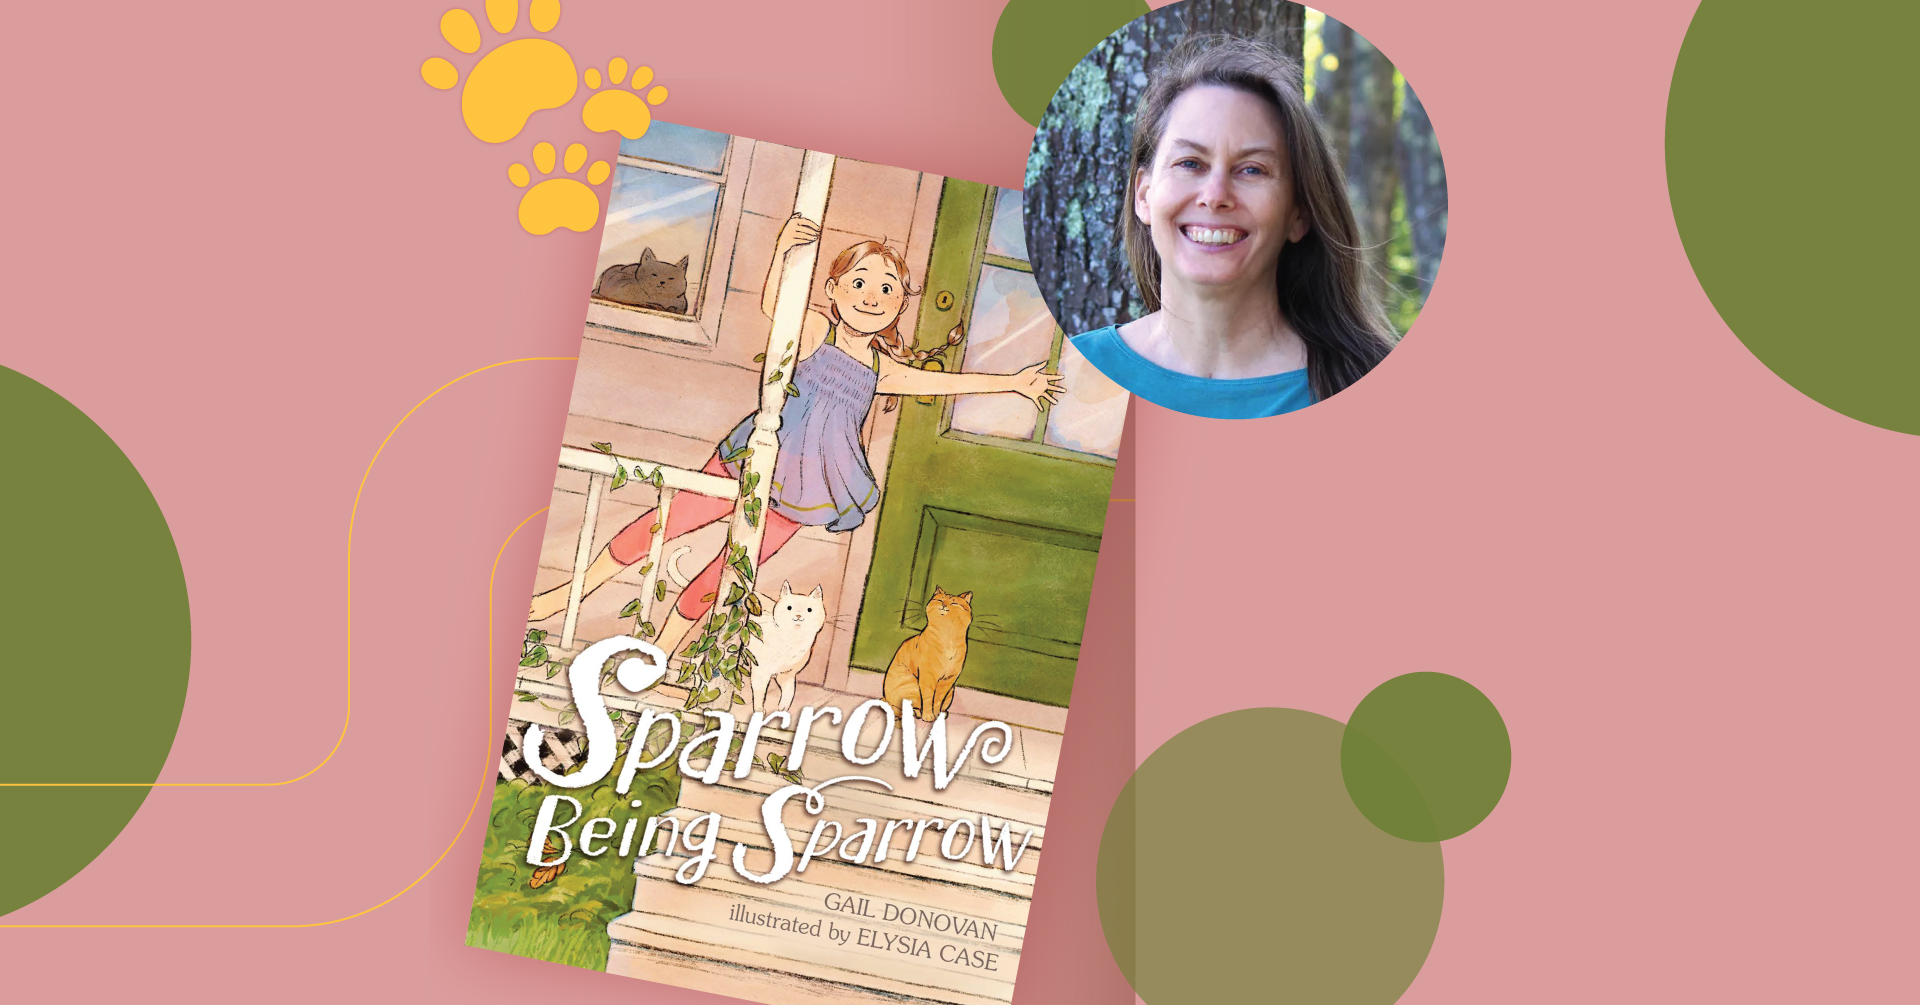 Cover of "Sparrow Being Sparrow" by author (pictured) Gail Donovan